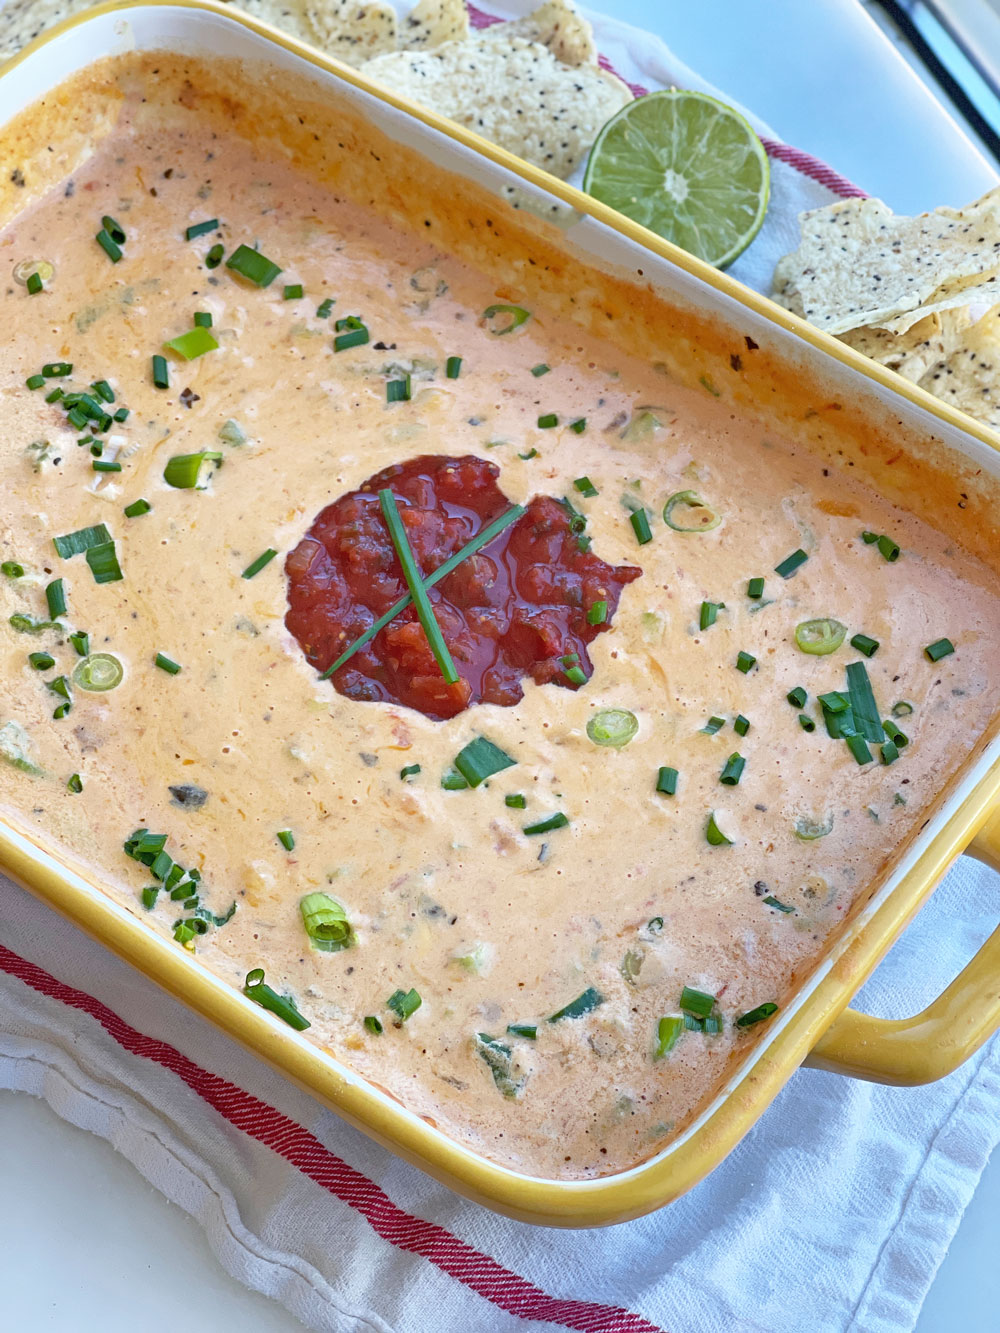 Easy Baked Queso Dip. This easy hack makes cooking easier and less mess. Happy Cooking! www.ChopHappy.com #quesodip #tiktokhack